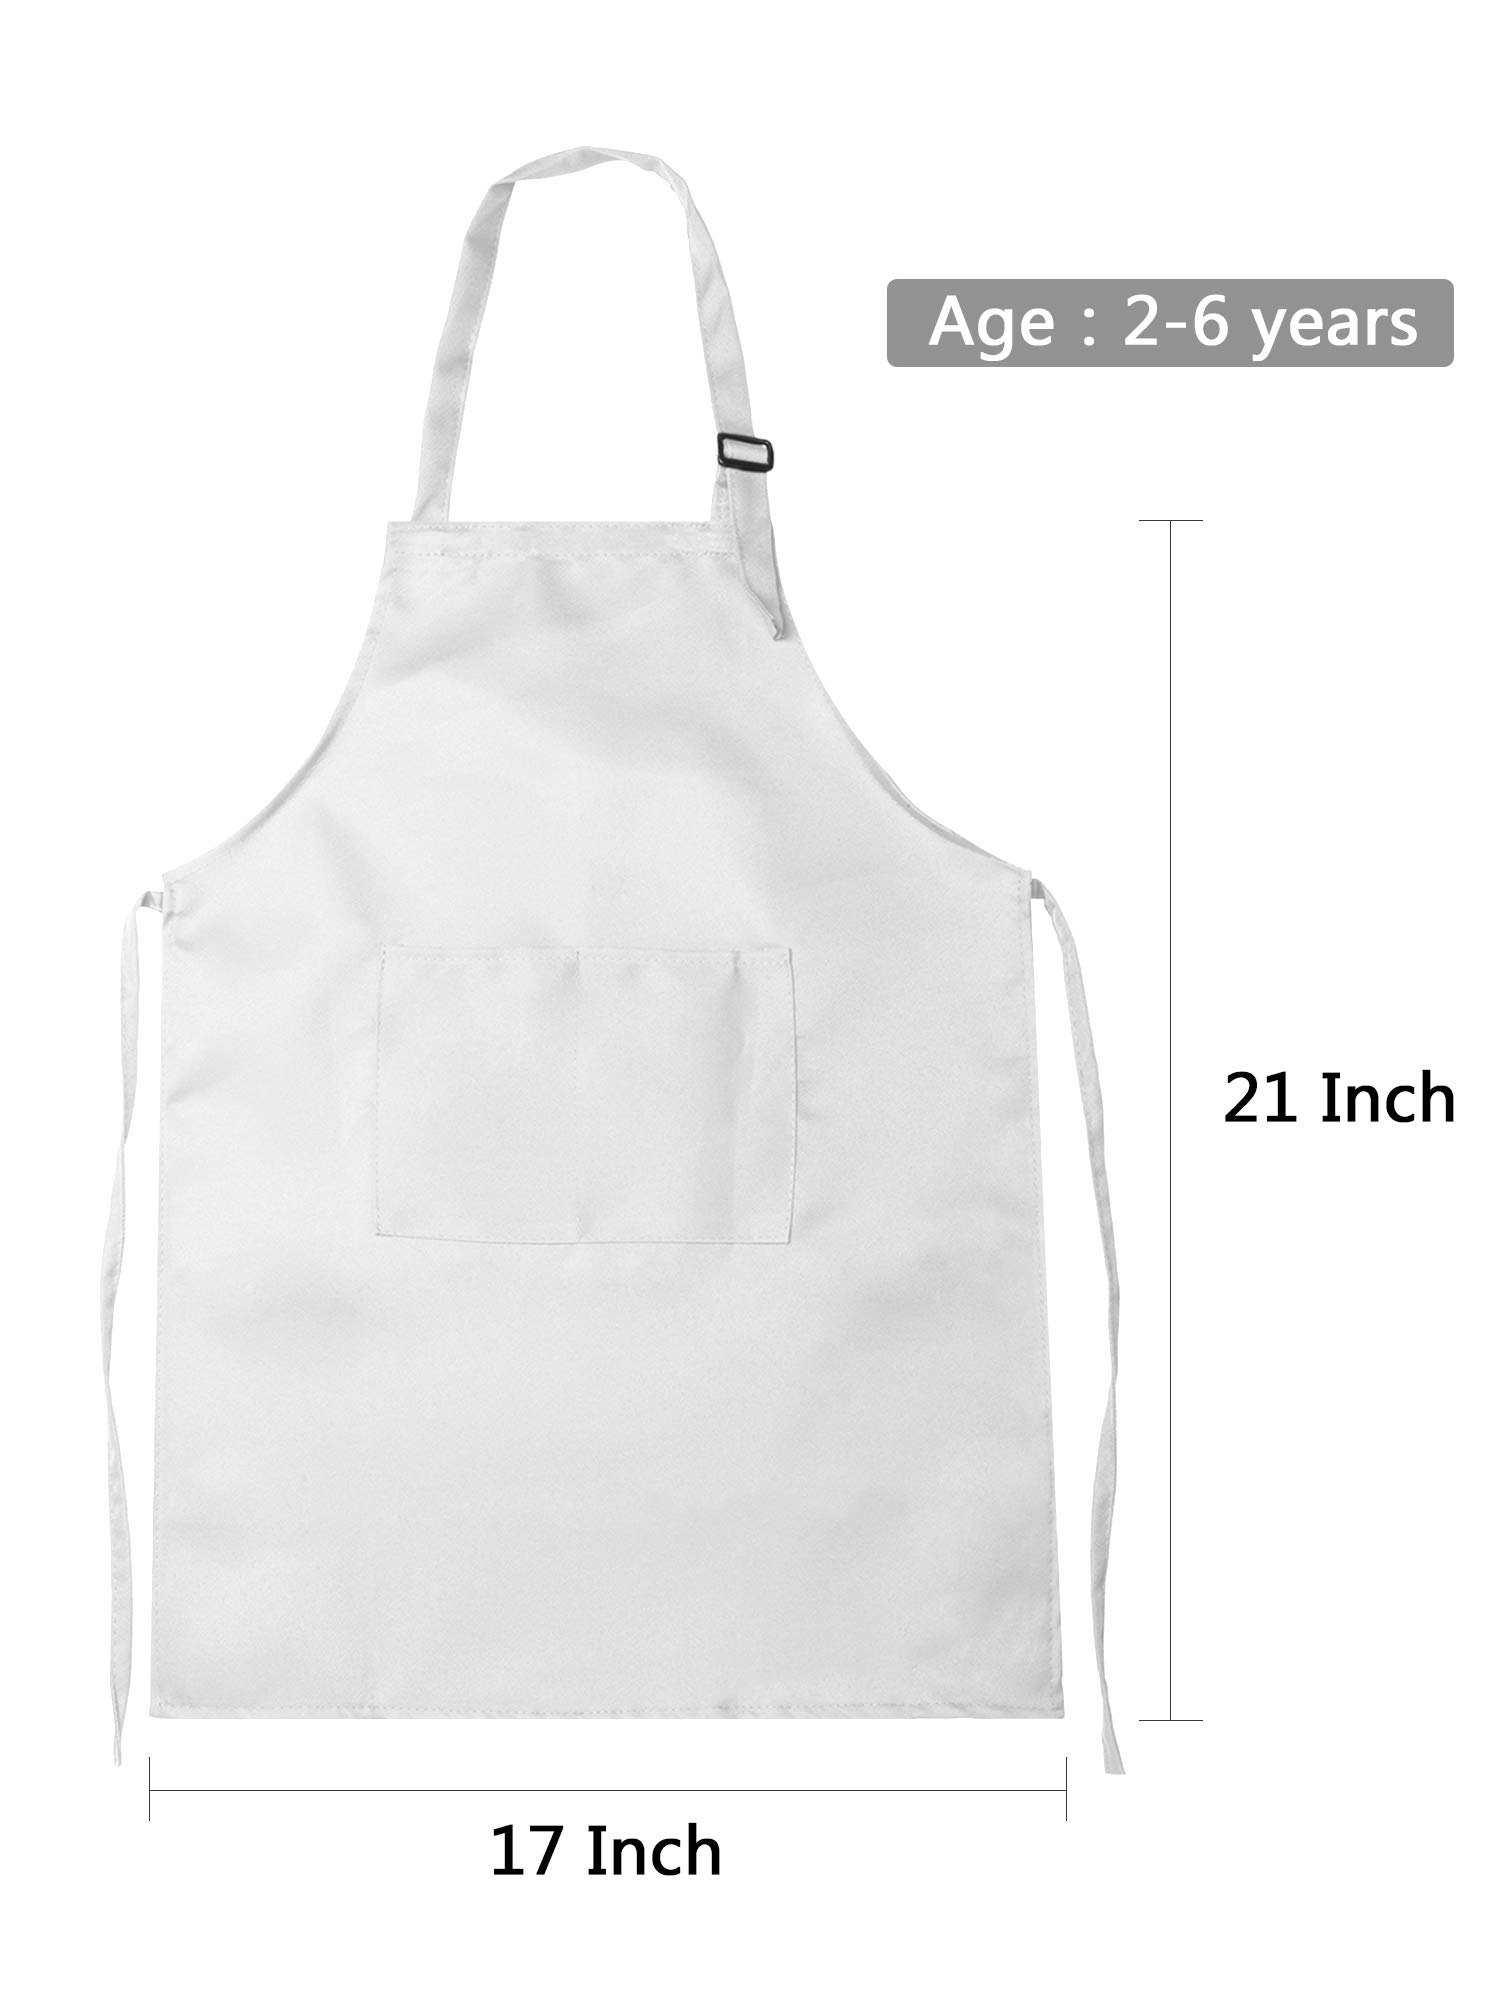 SATINIOR 12 Pieces Kids Aprons Chef Hats Adjustable Child Aprons with Pockets Kitchen Bib